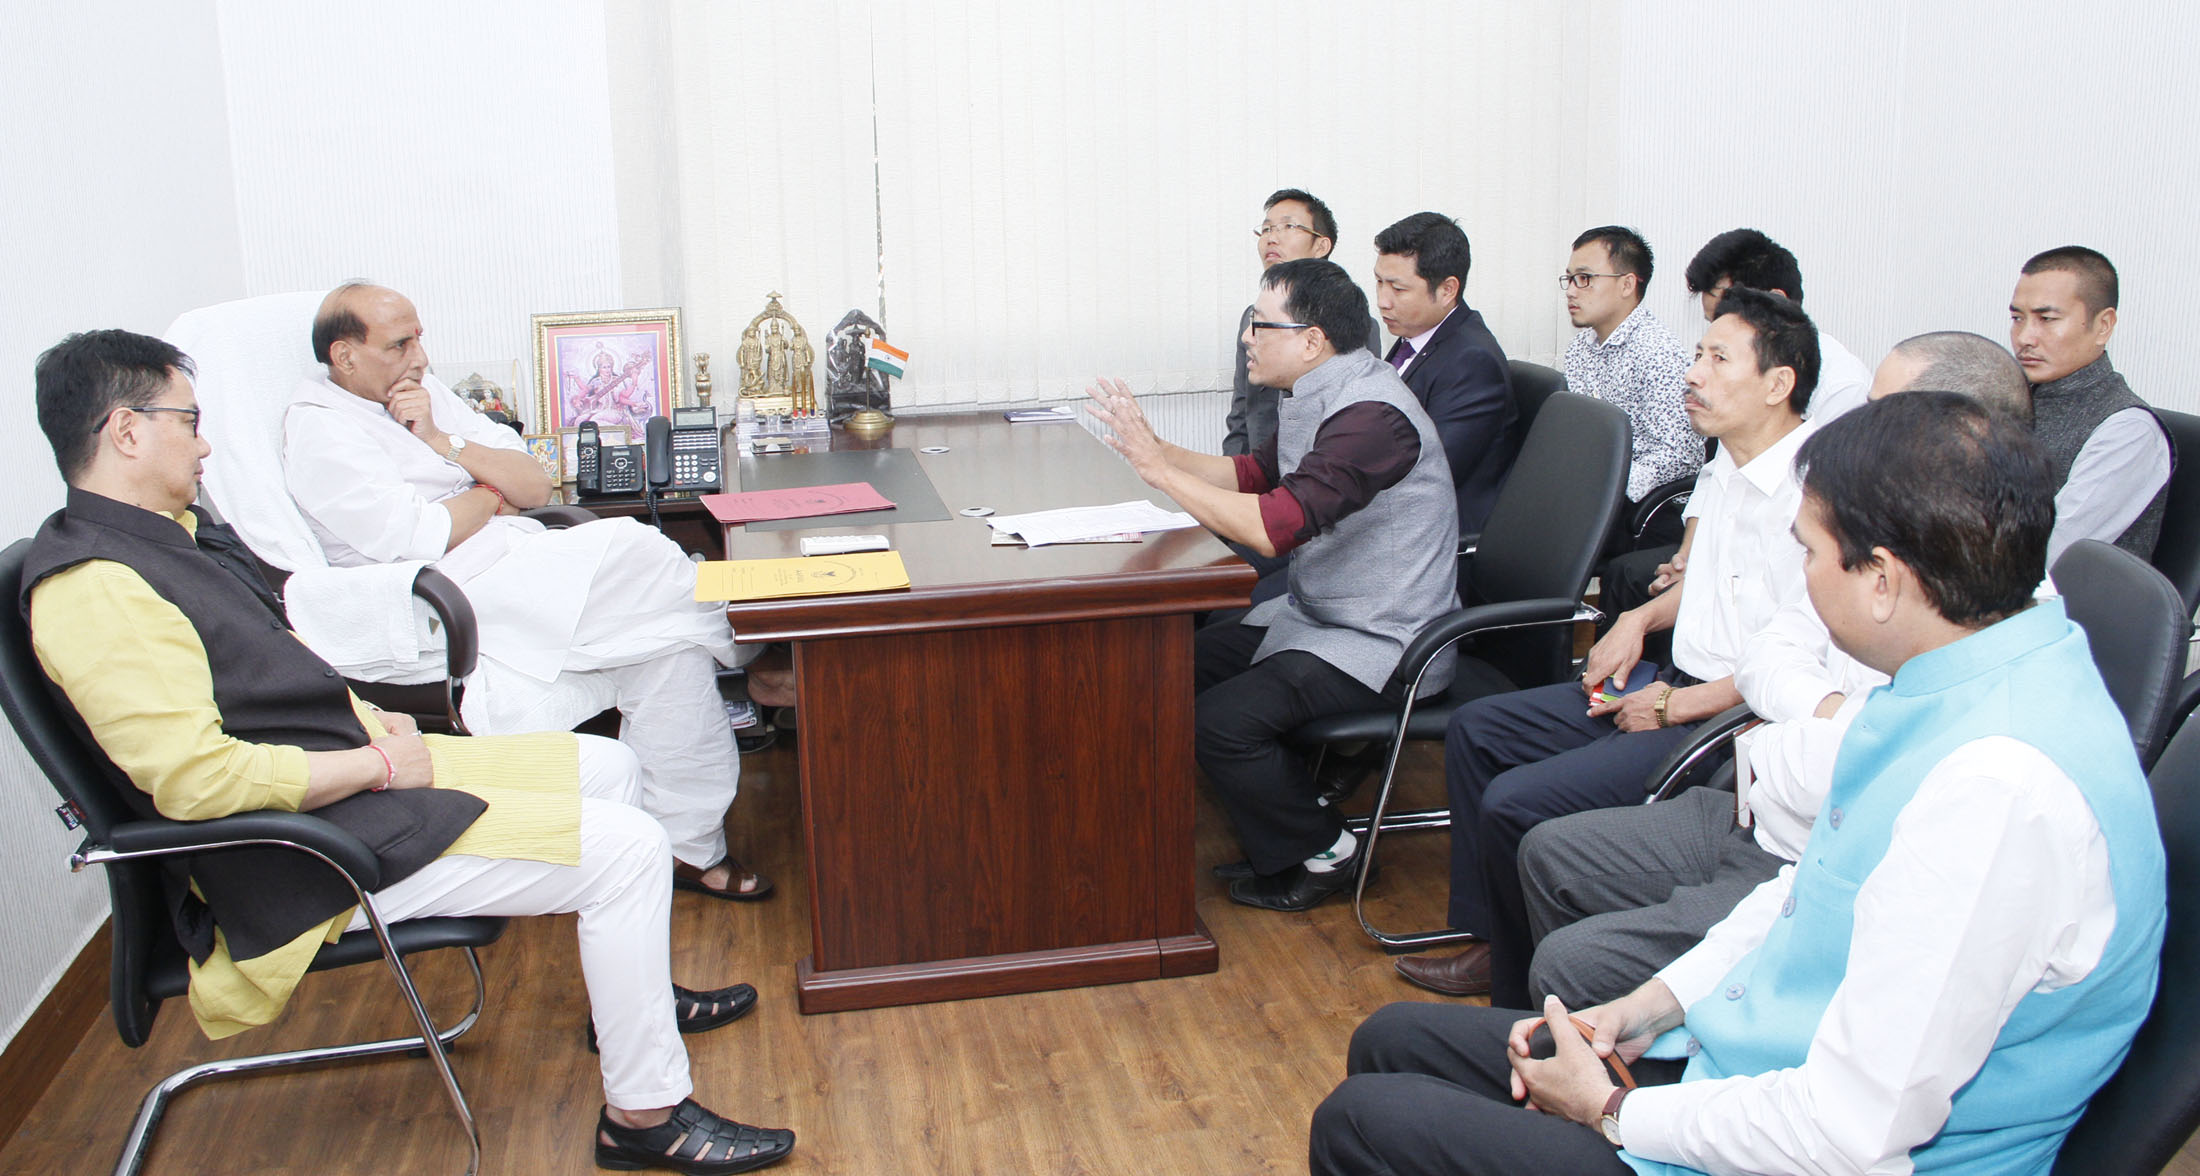 A delegation of Core Group Committee for Chakma and Hazoms led by Shri Gunjam Haider, accompanied by the Minister of State for Home Affairs, Shri Kiren Rijiju, calling on the Union Home Minister, Shri Rajnath Singh, in New Delhi on October 22, 2015.